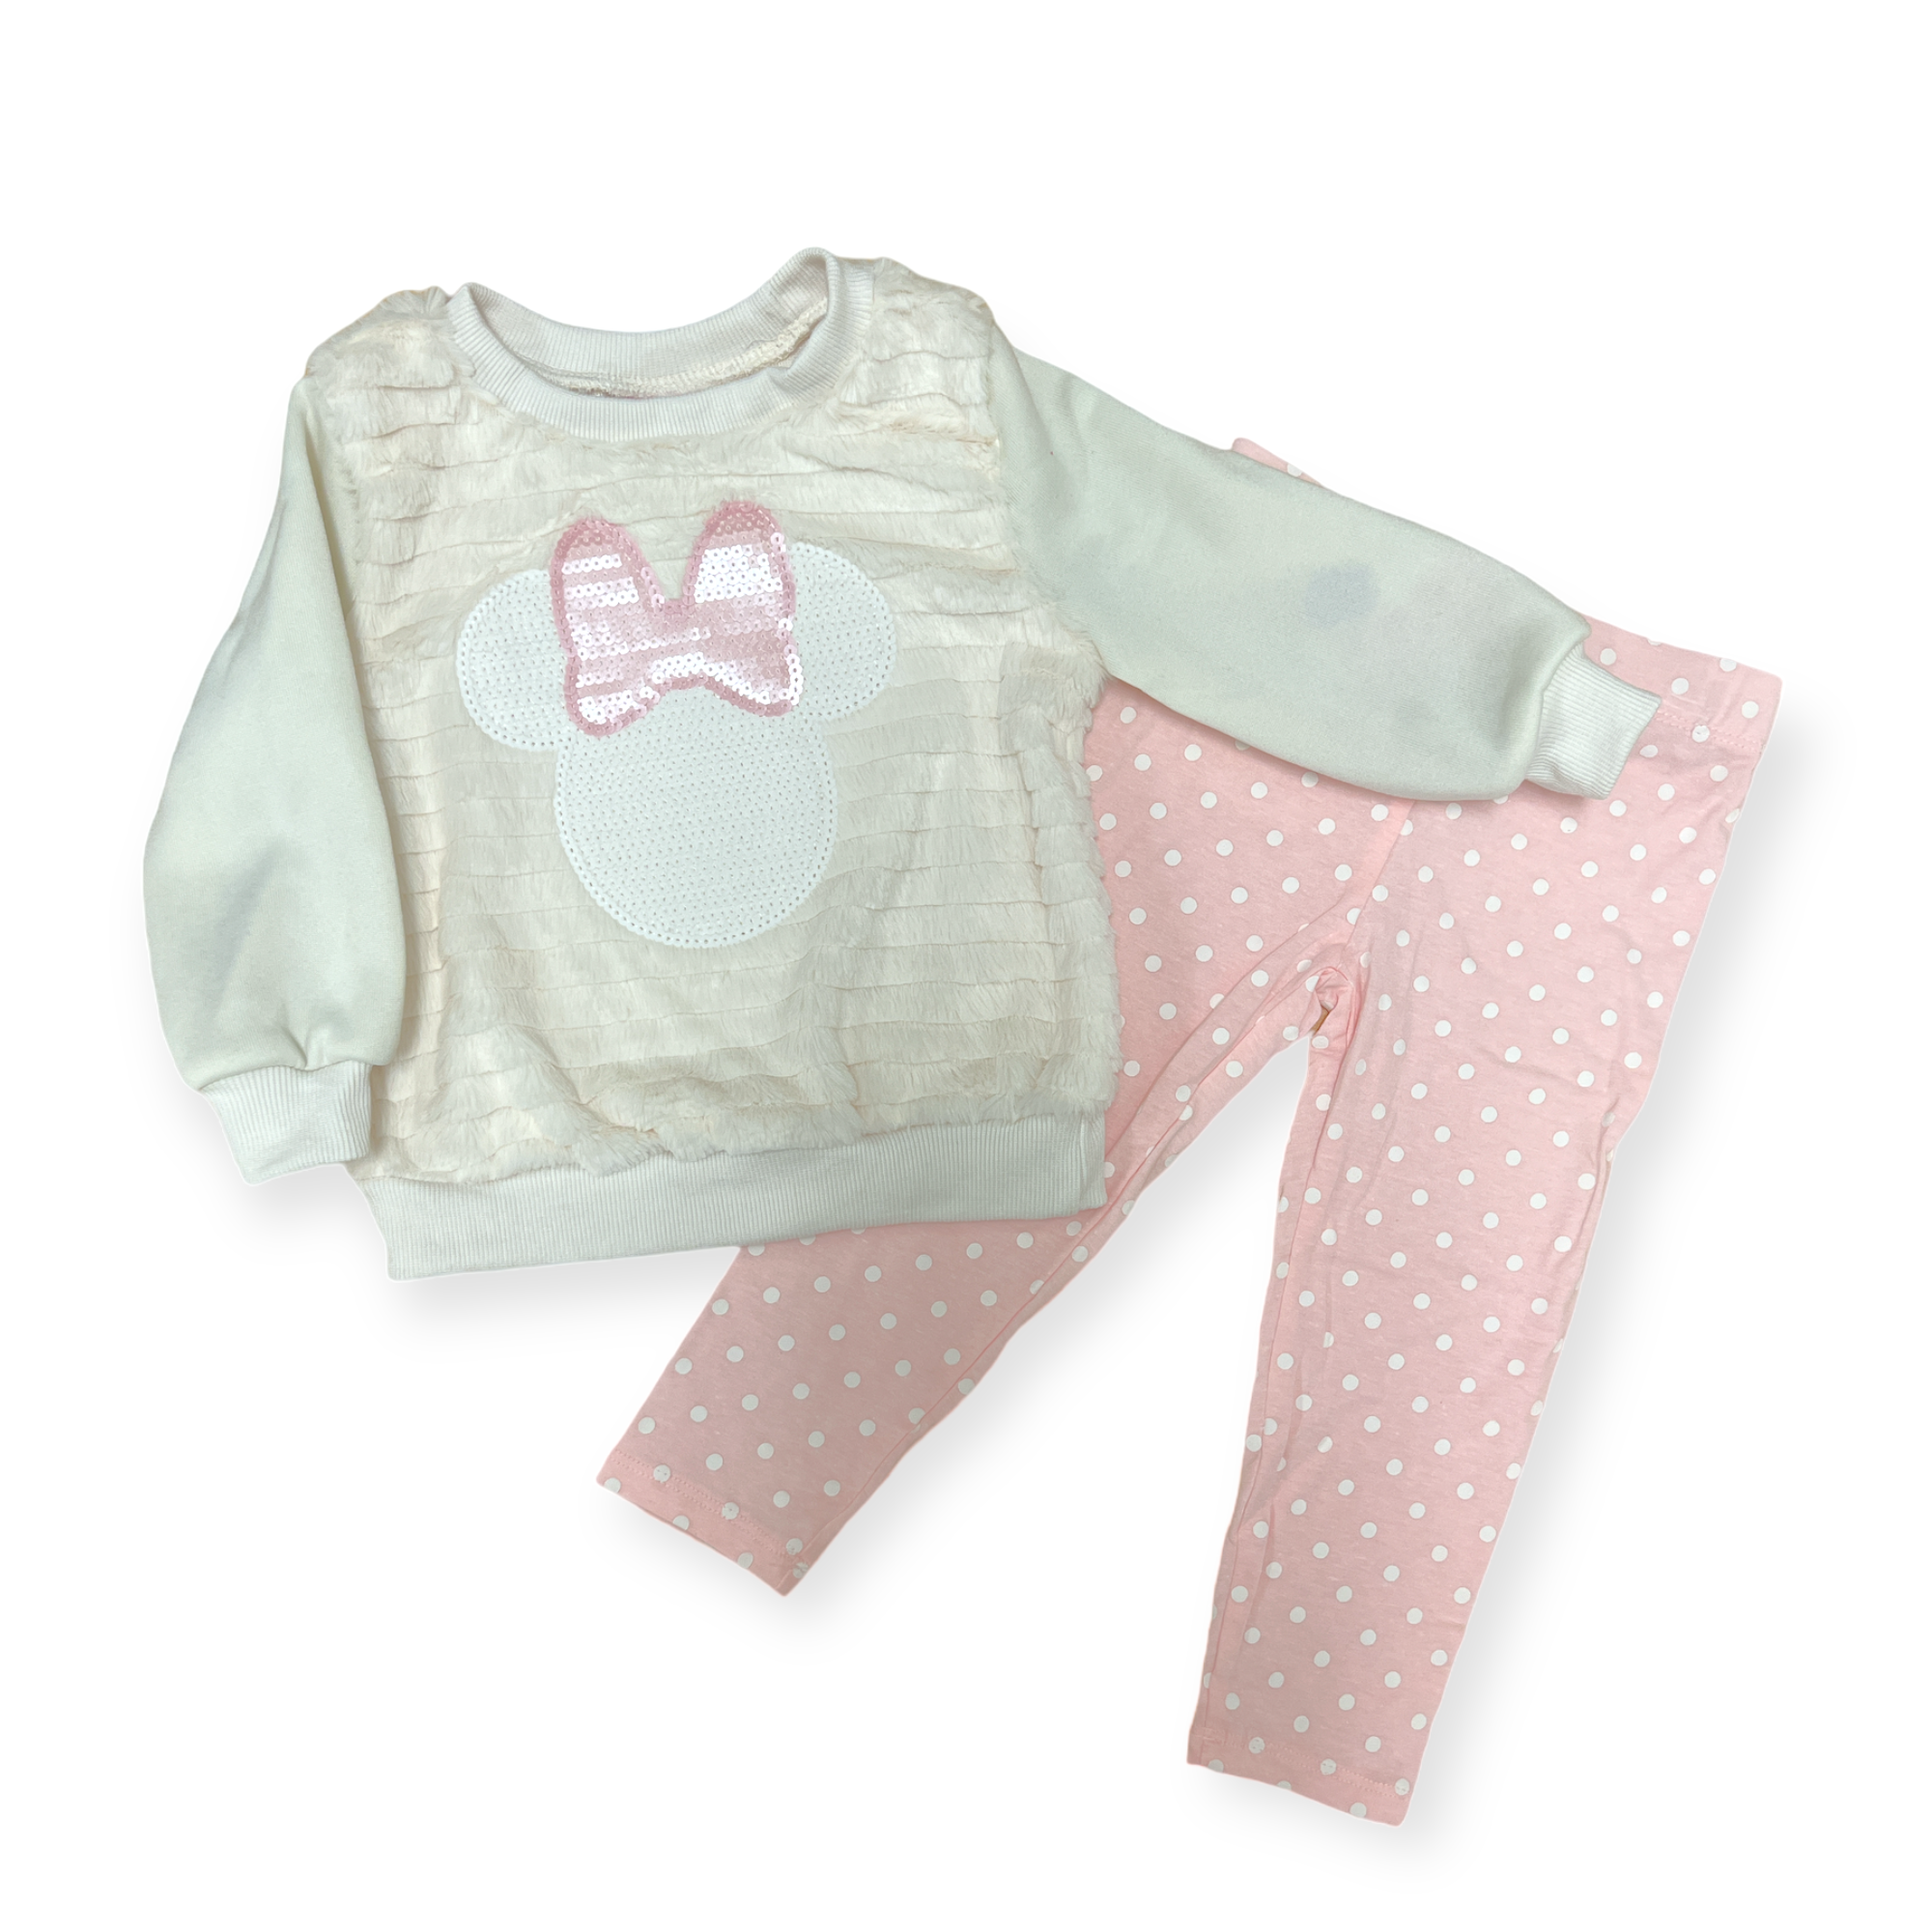 Toddlers 2 Pack Minnie Mouse Sweatshirt and Pants, Pink